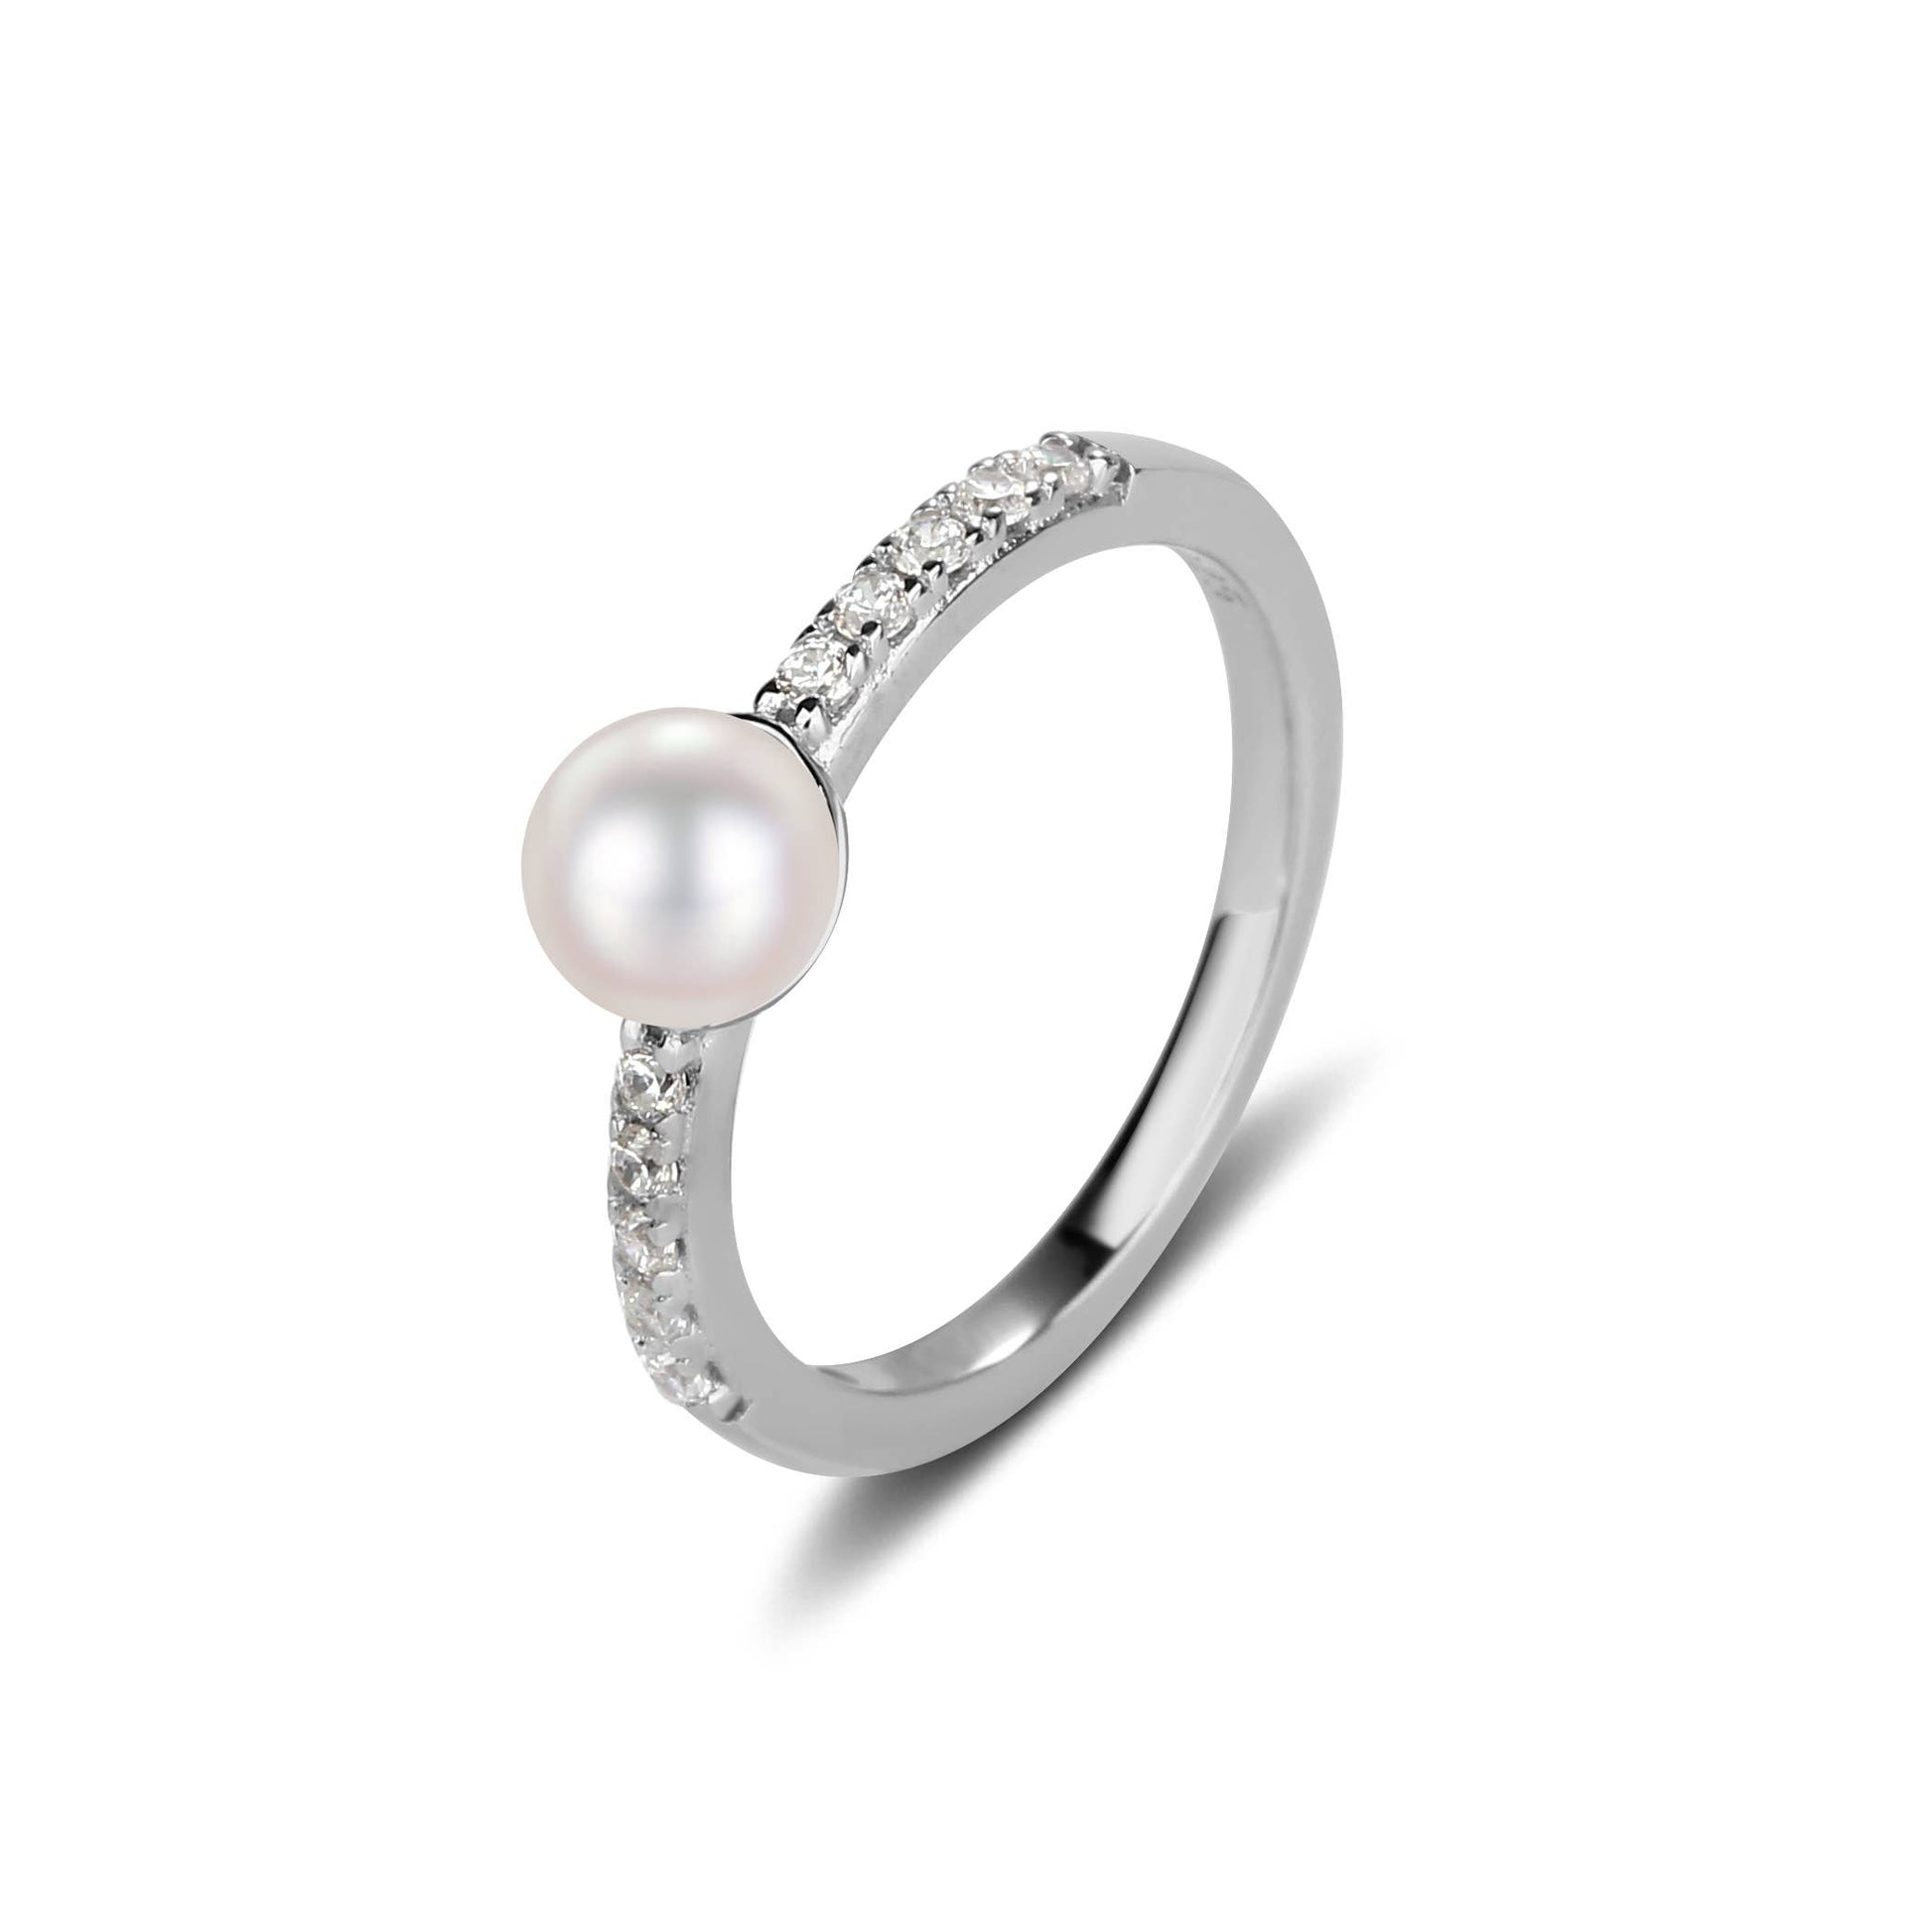 Sterling Silver Freshwater Pearl Baby Ring w CZ for Kids - Size 5 Kids Jewelry Cherished Moments   